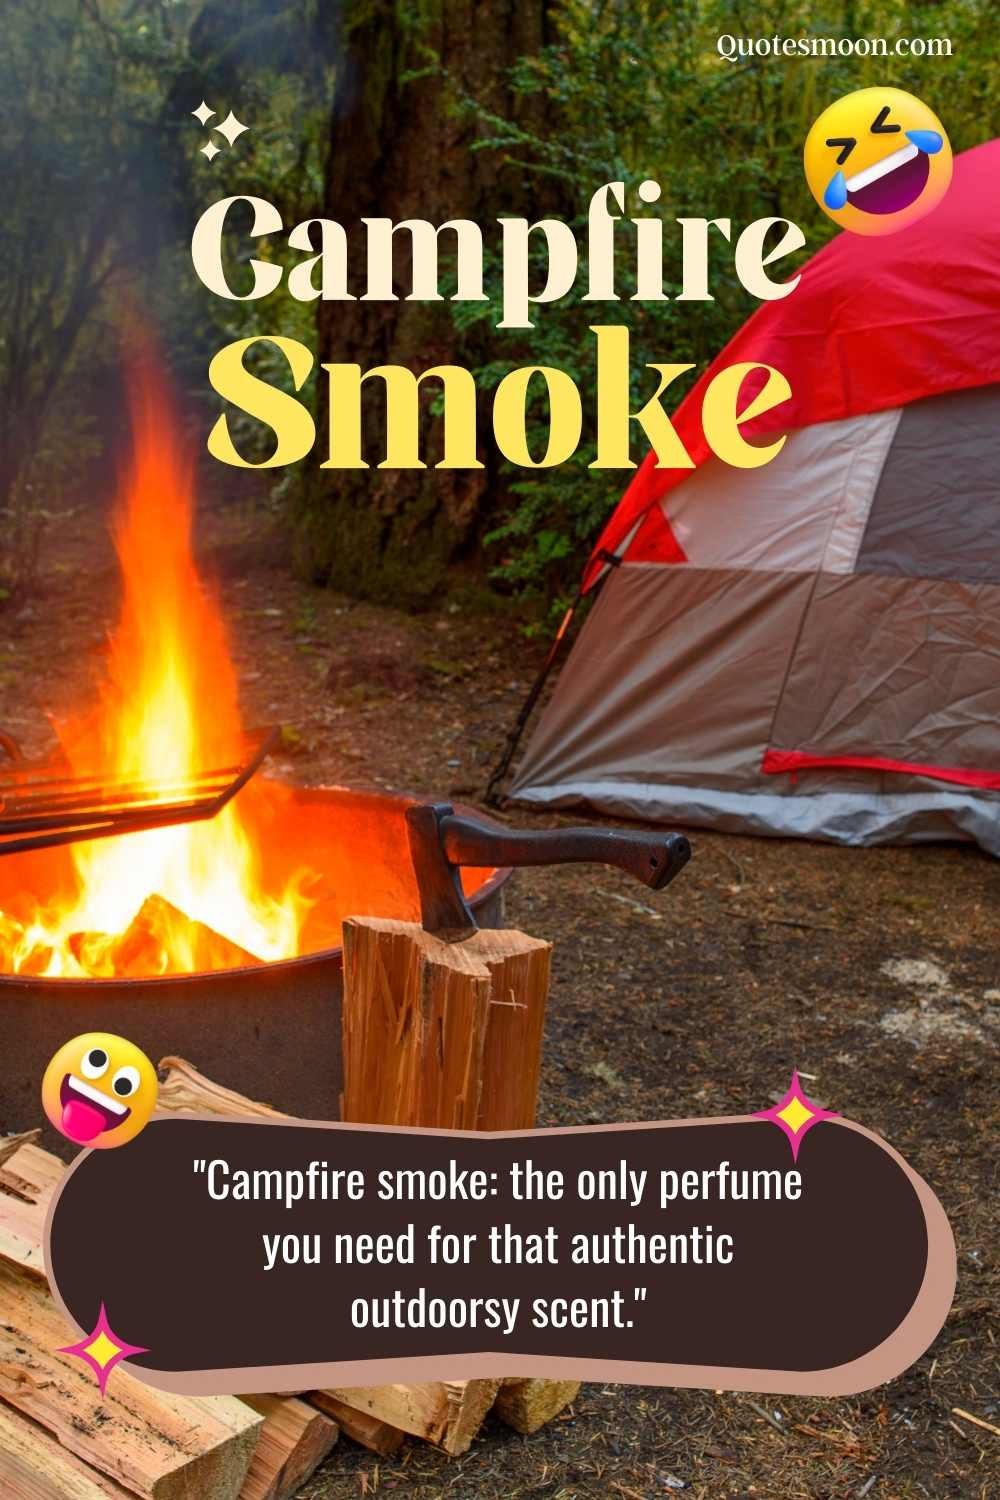 Instagram quotes images for Your Camp 